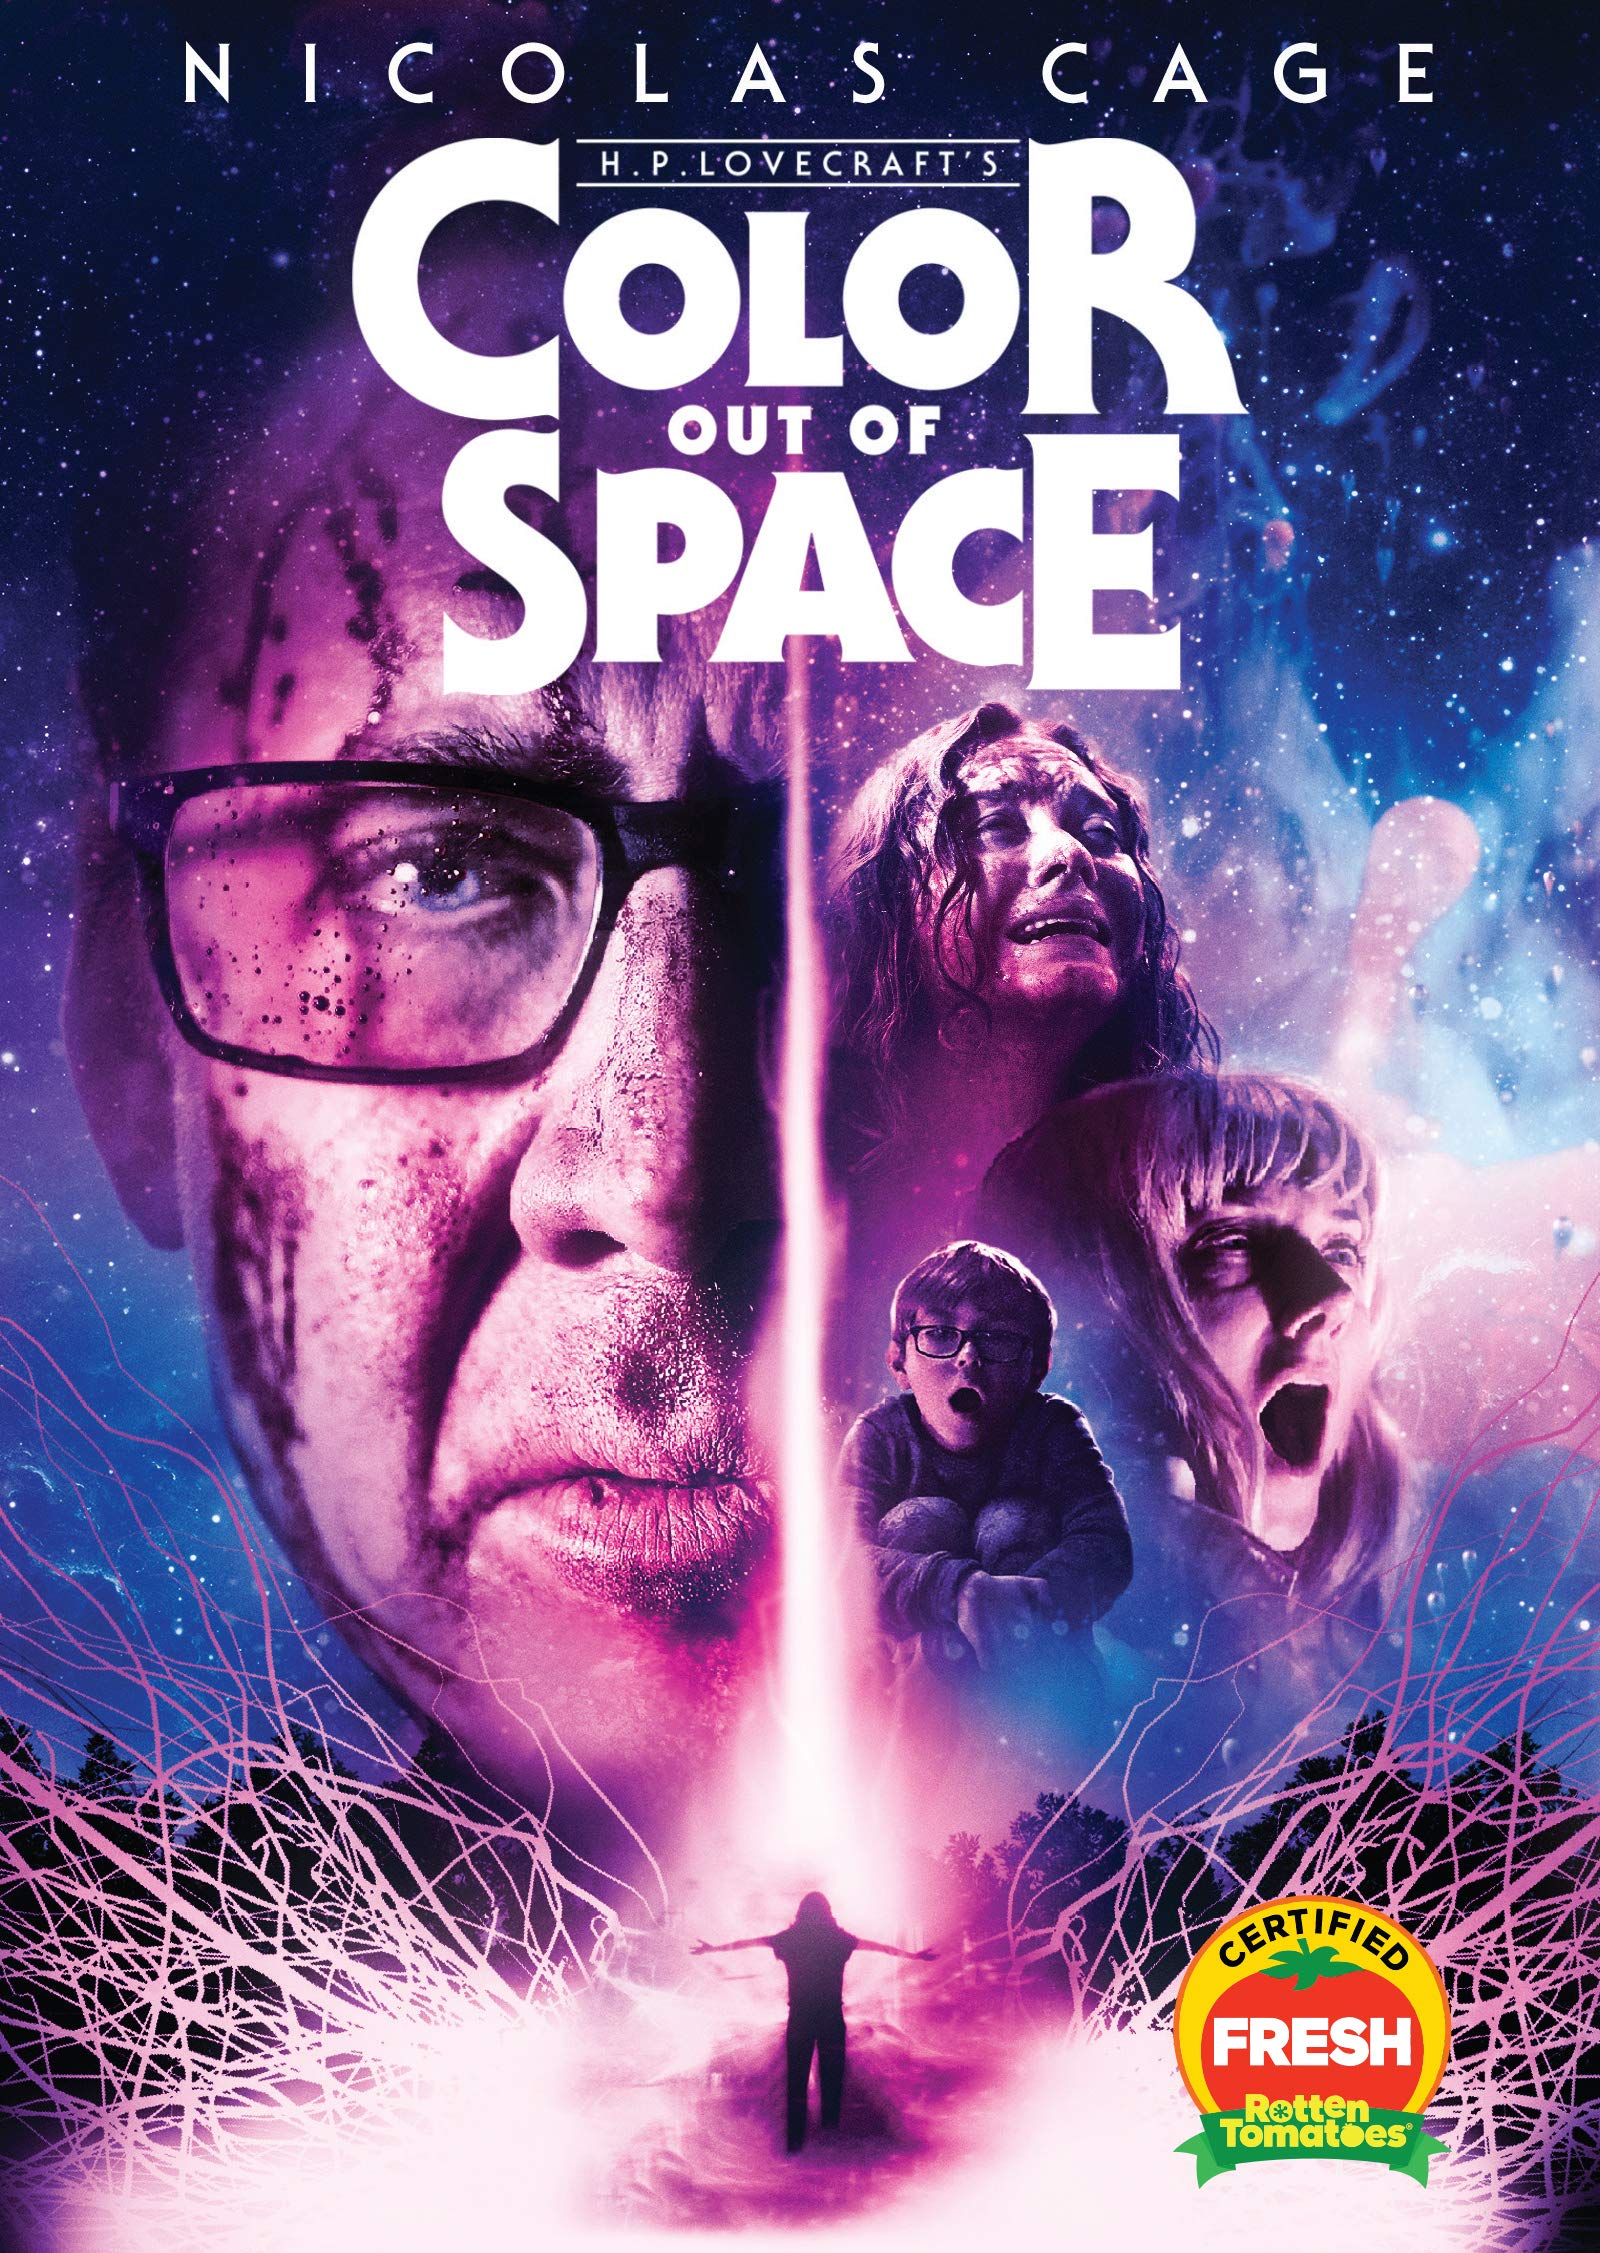 Color Out of Space DVD Release Date February 25, 2020